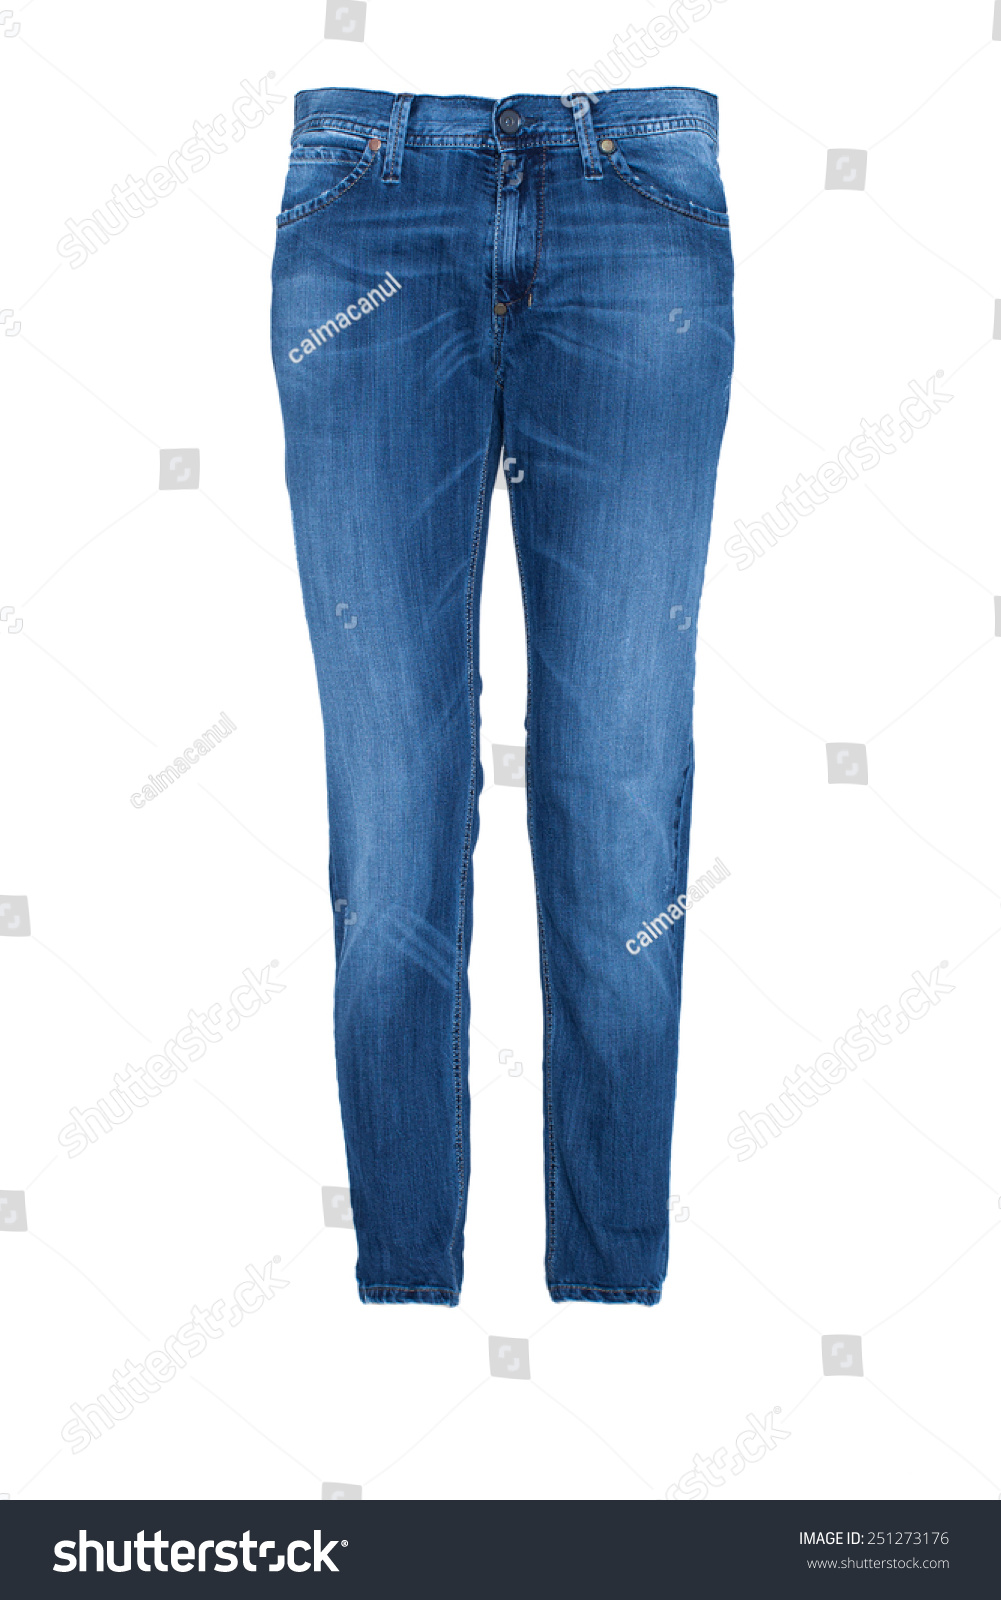 Pair Blue Jeans Isolated On White Stock Photo 251273176 - Shutterstock